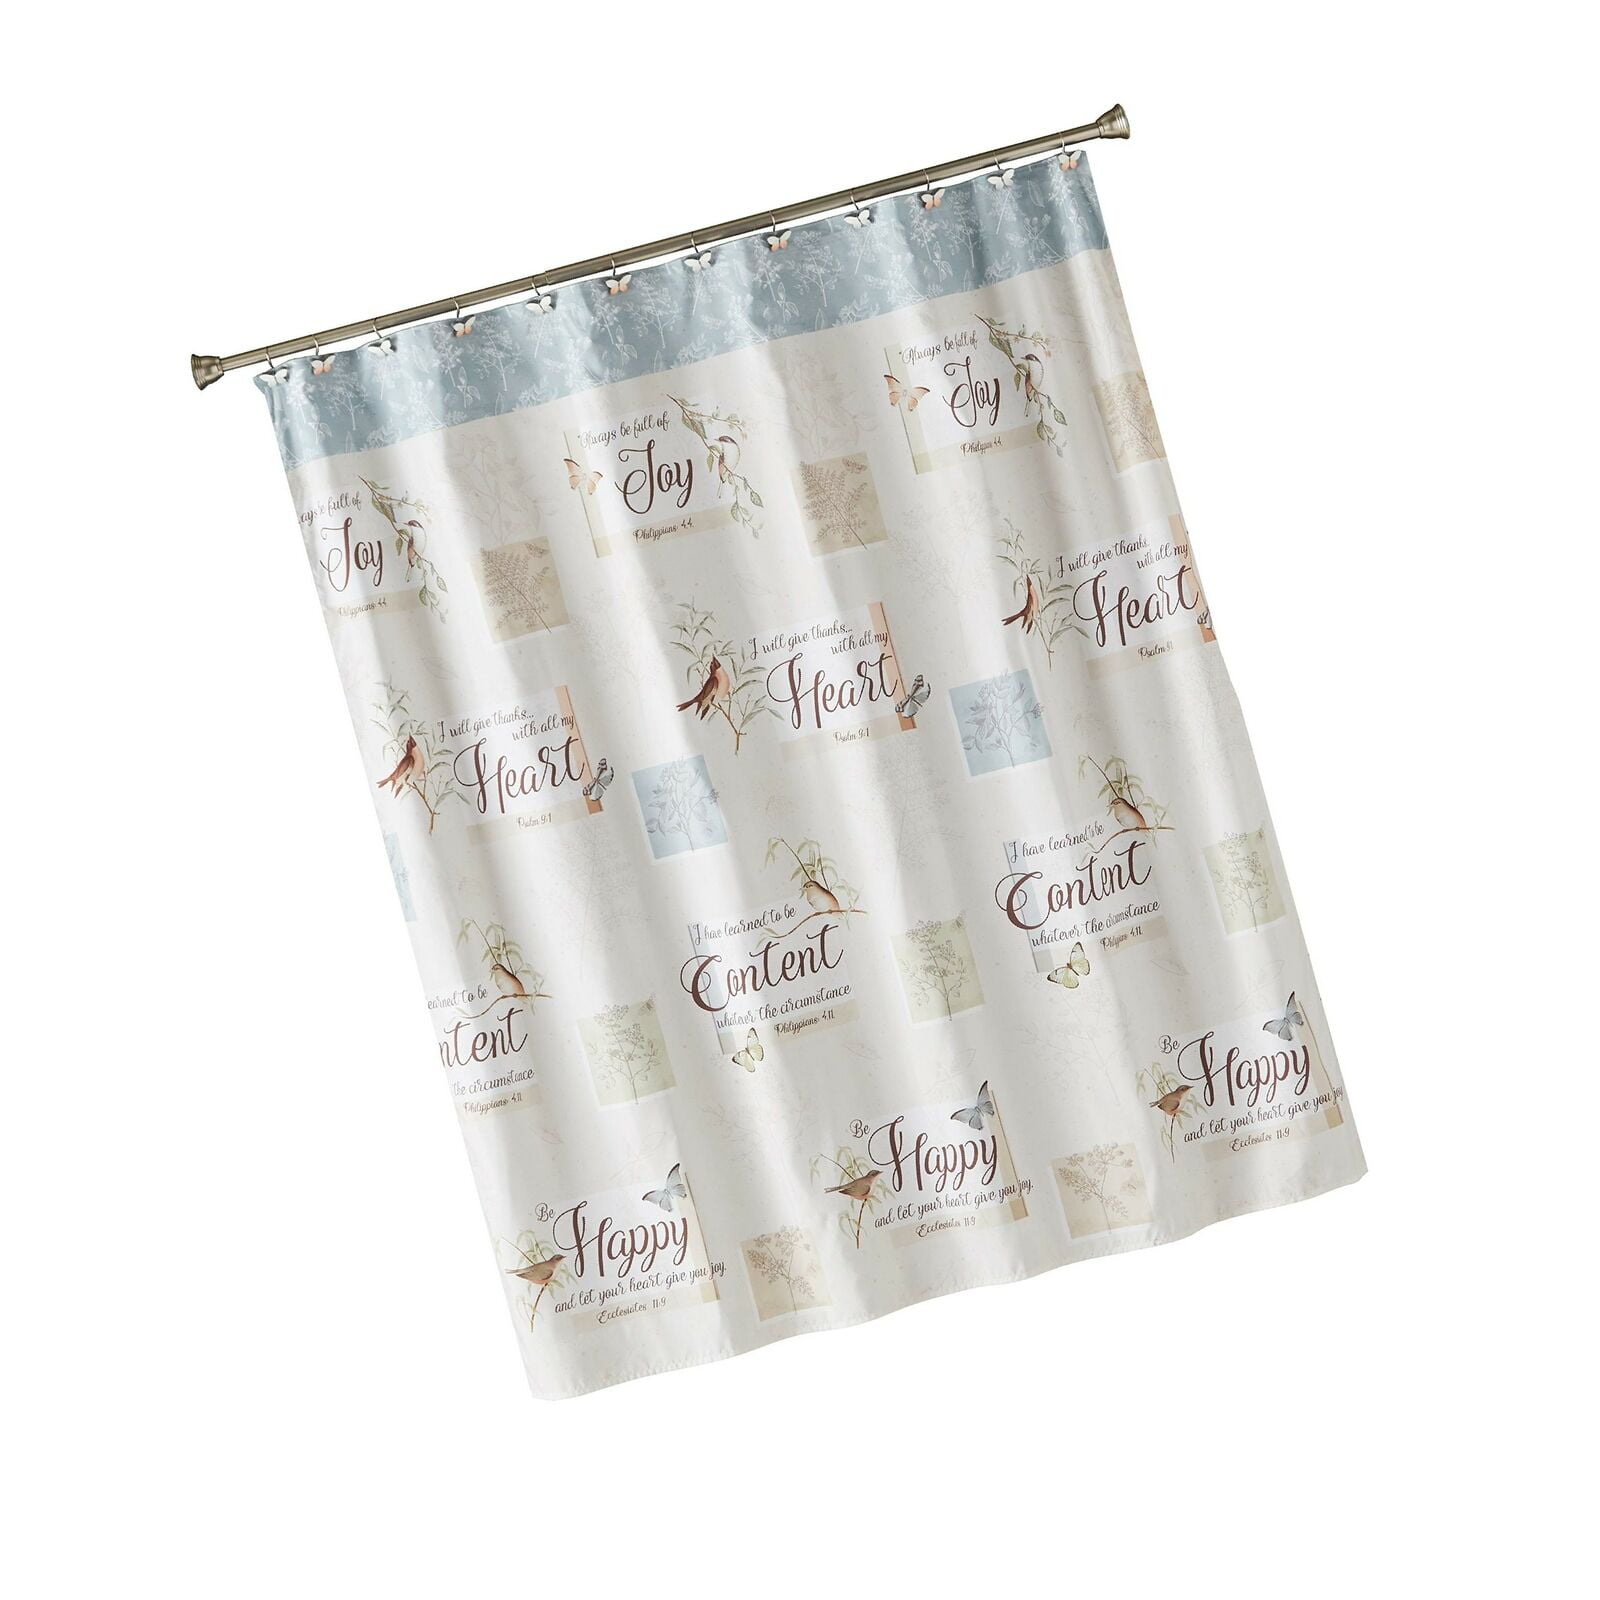 Skl Home By Saay Knight Ltd New, Multicolored Shower Curtain